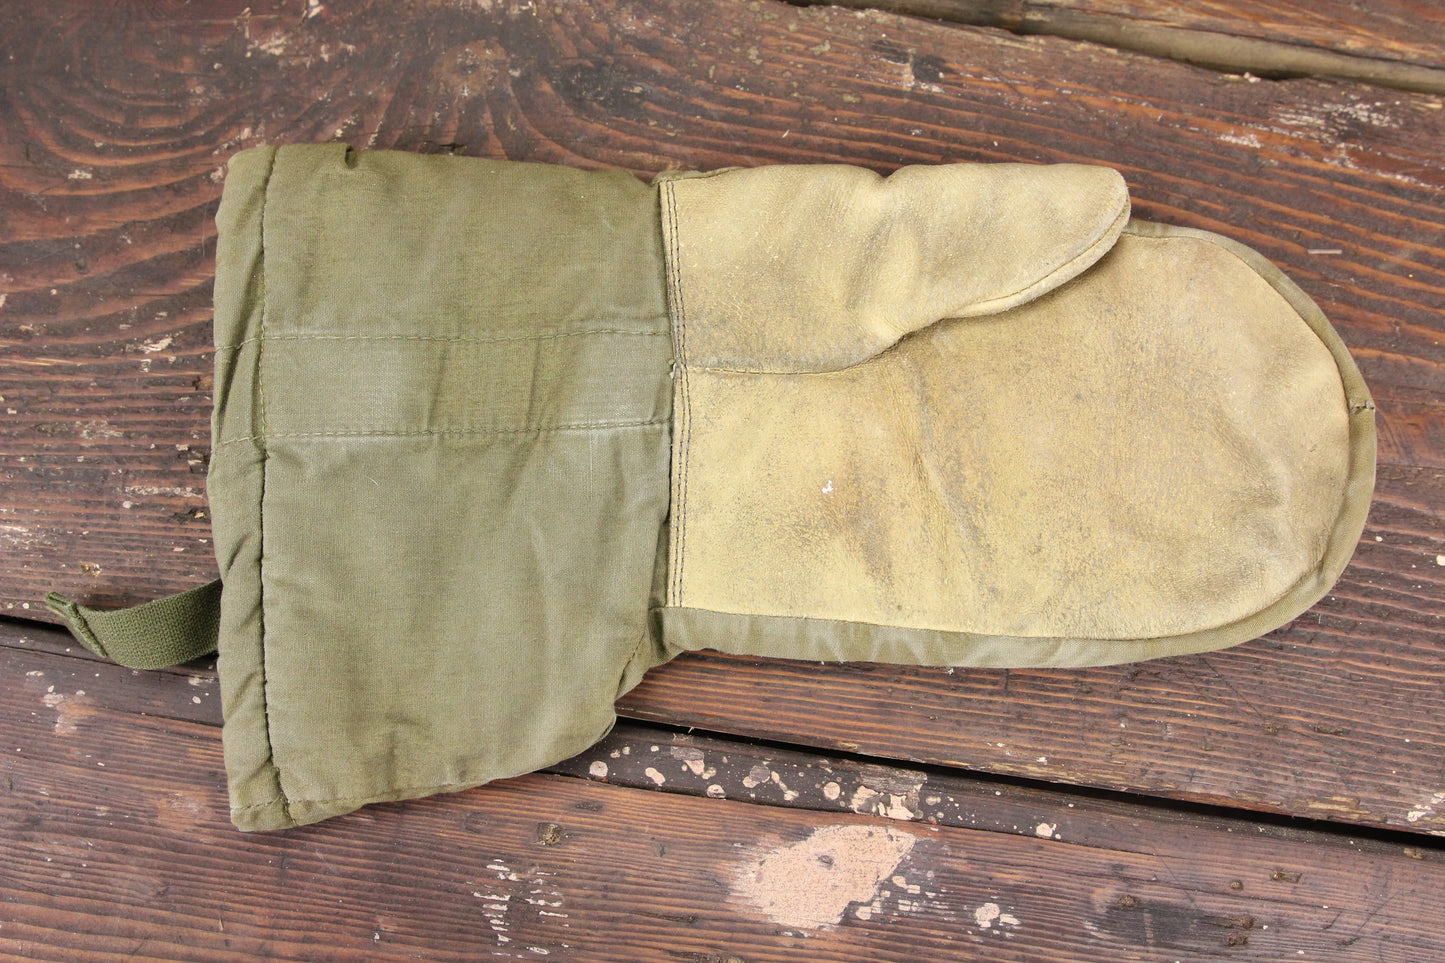 WWII Era Insulated Military Issue Mittens (Air Force or Army), Size Medium, Pair